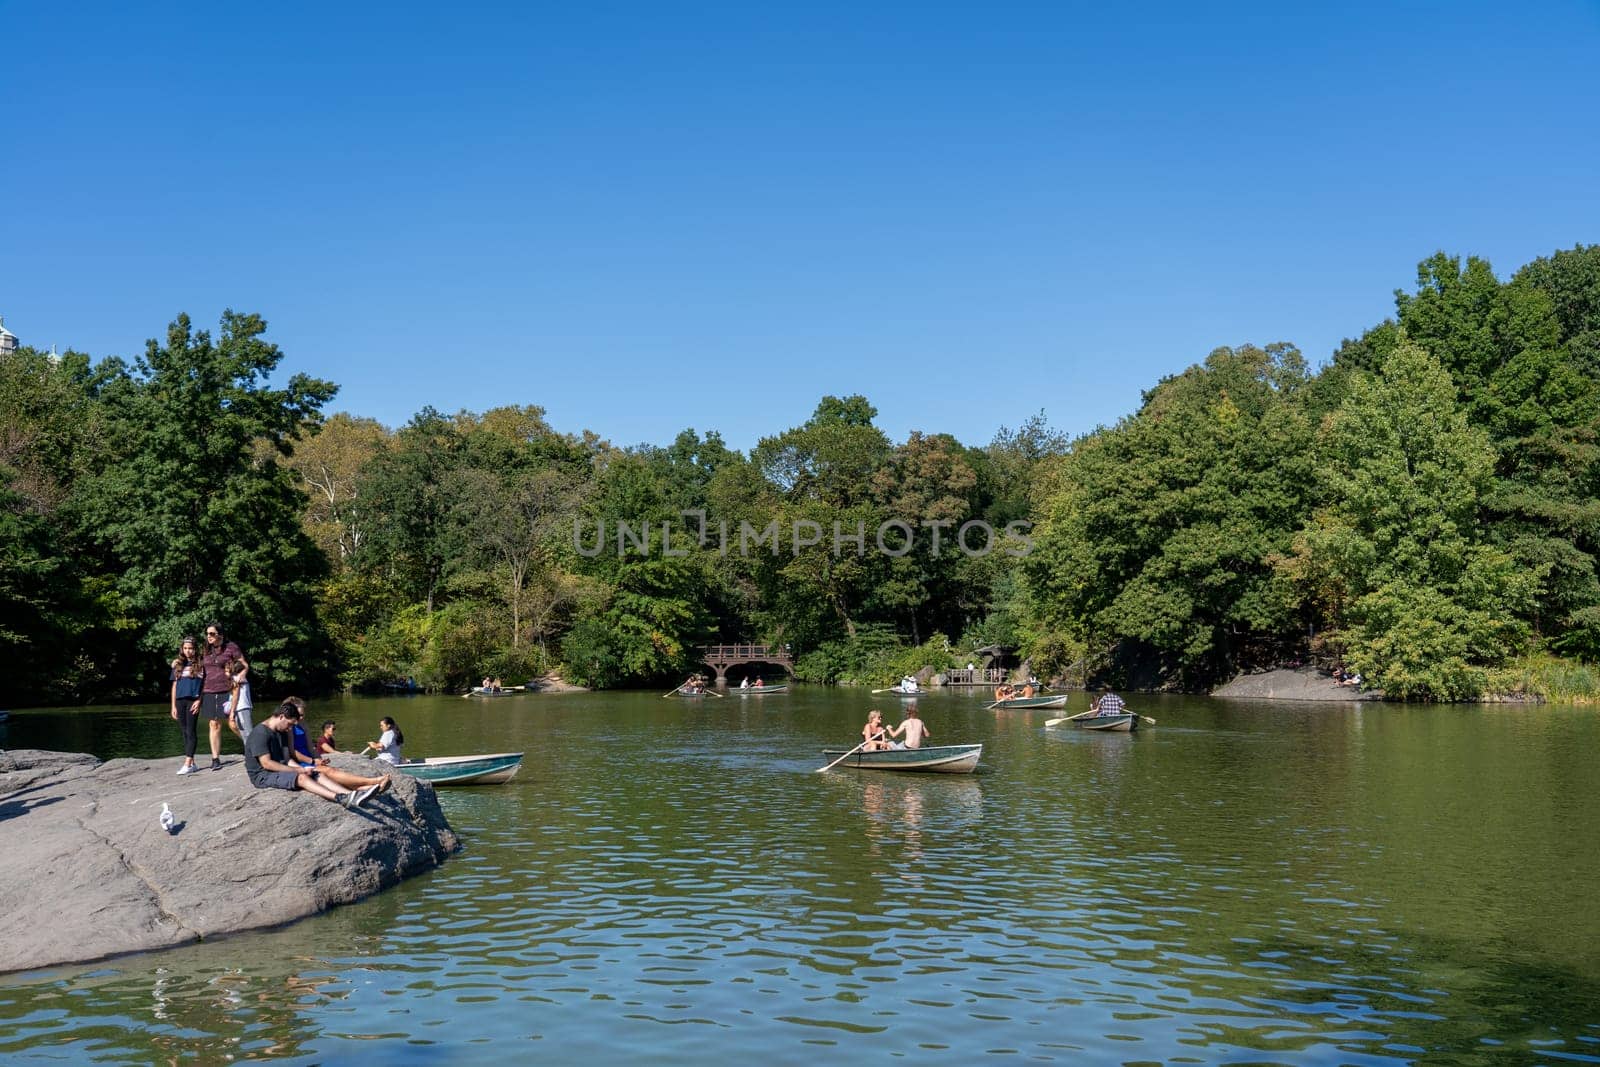 New York City, USA - September 21, 2019: People in rowboats on The Lake in Central Park.